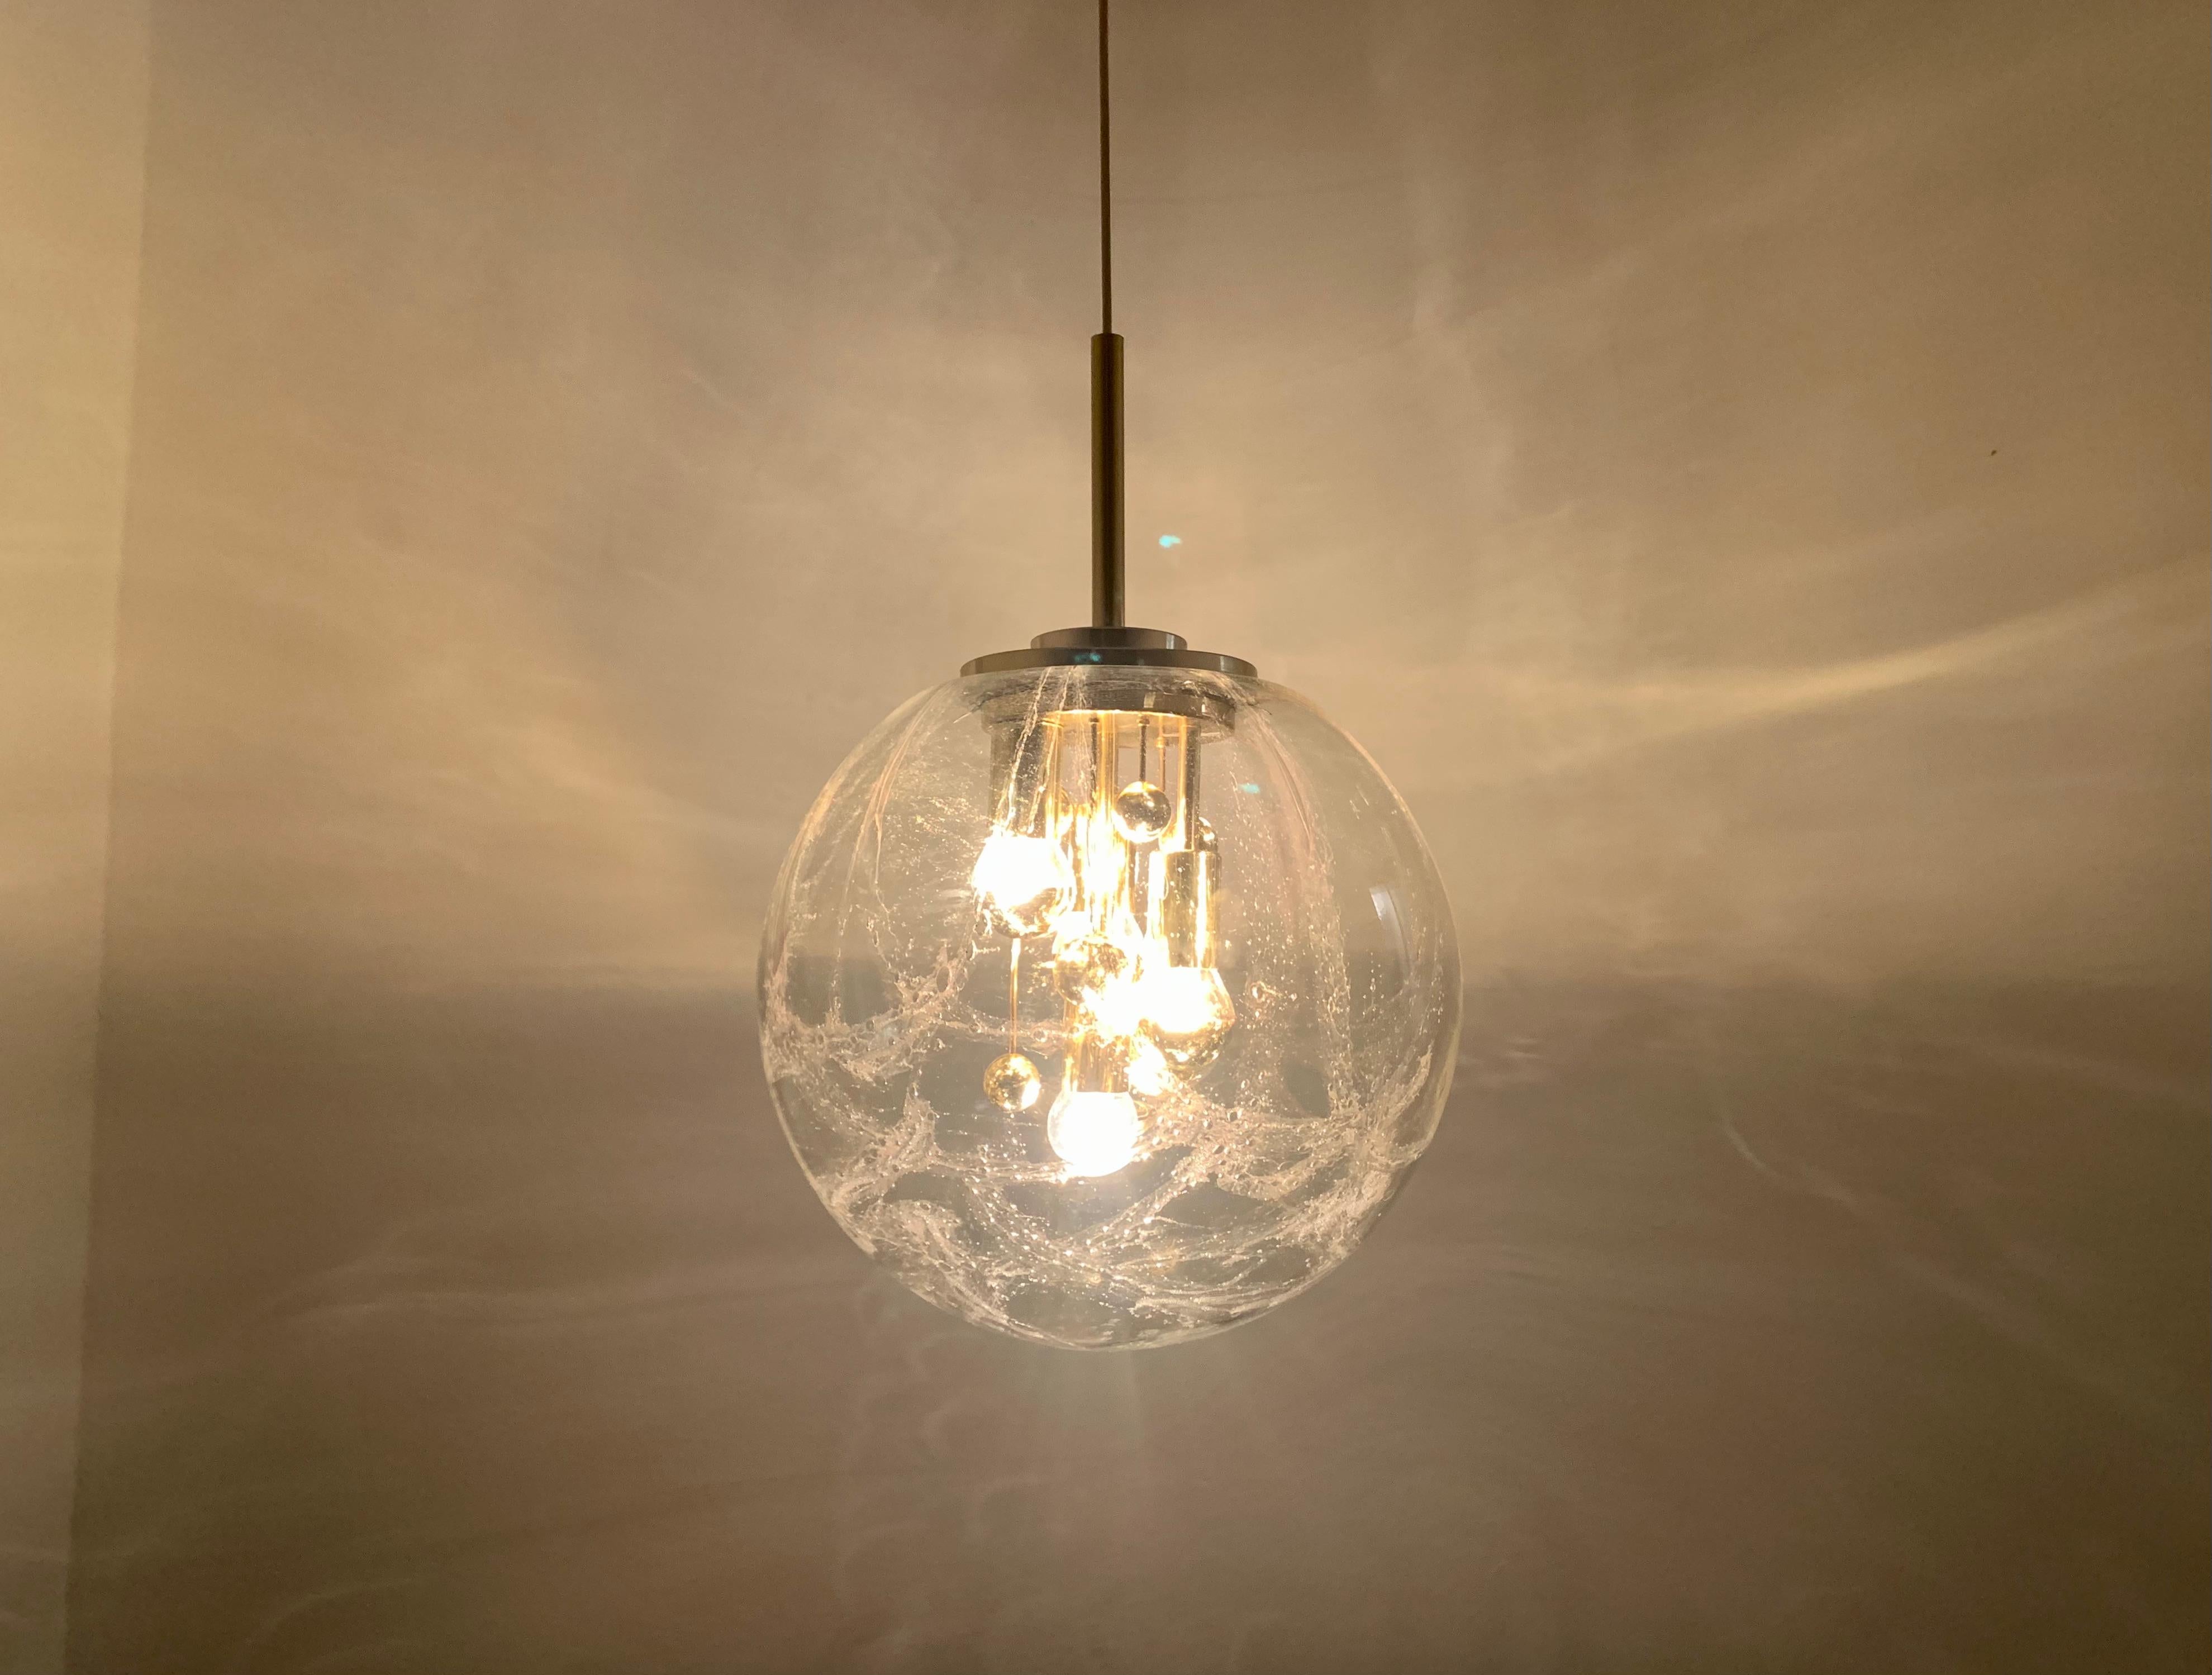 Big Ball Glass Pendant Lamp by Doria For Sale 1